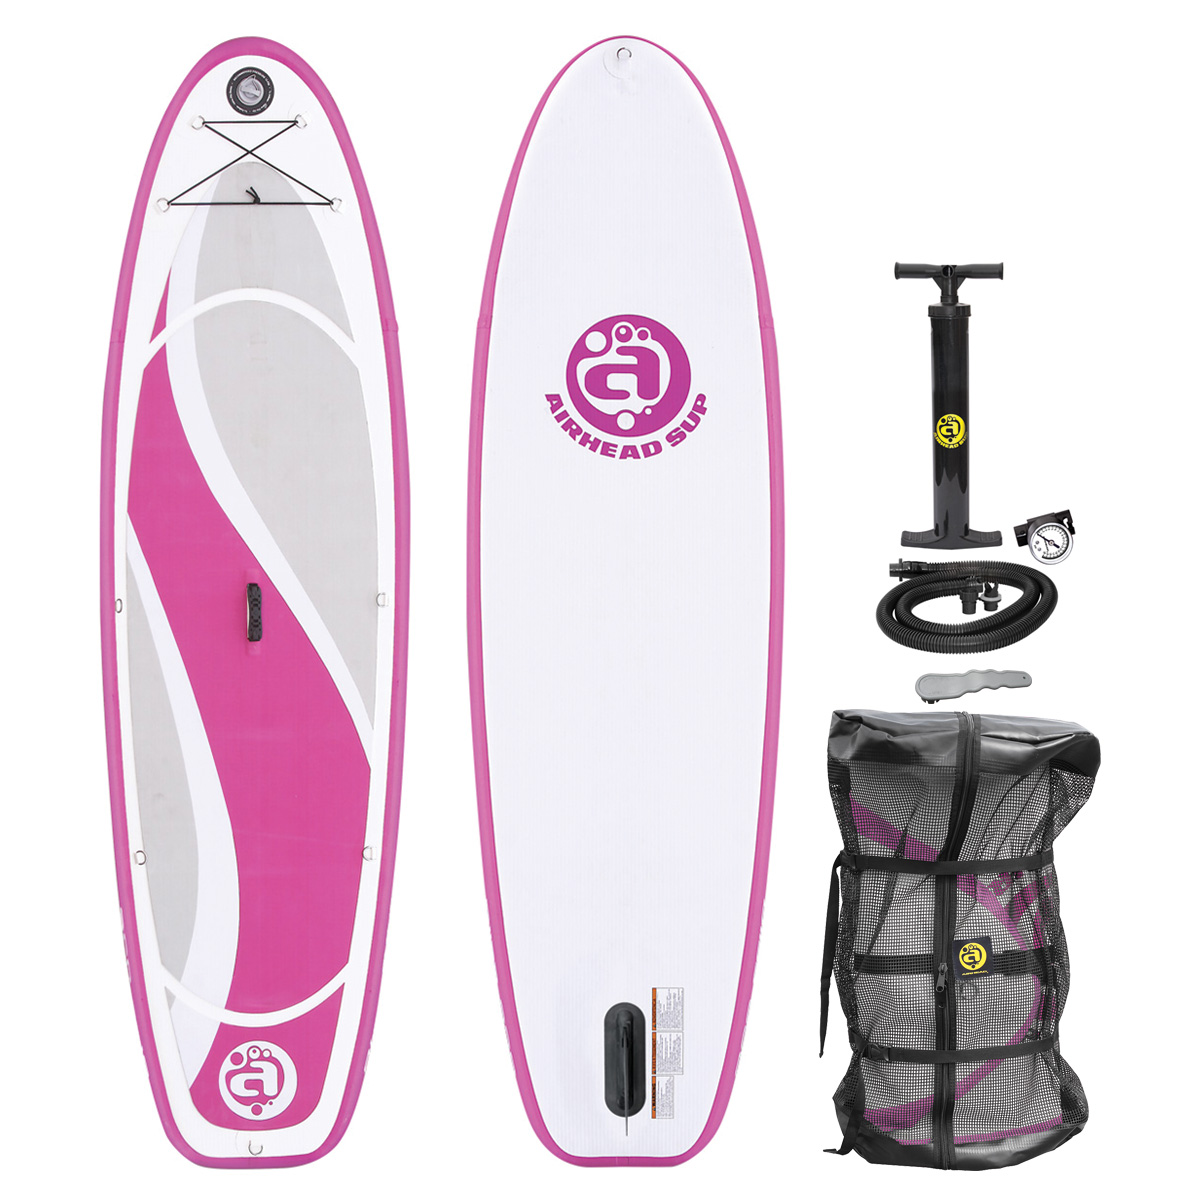 Airhead Bliss 930 pink inflatable stand up paddle board